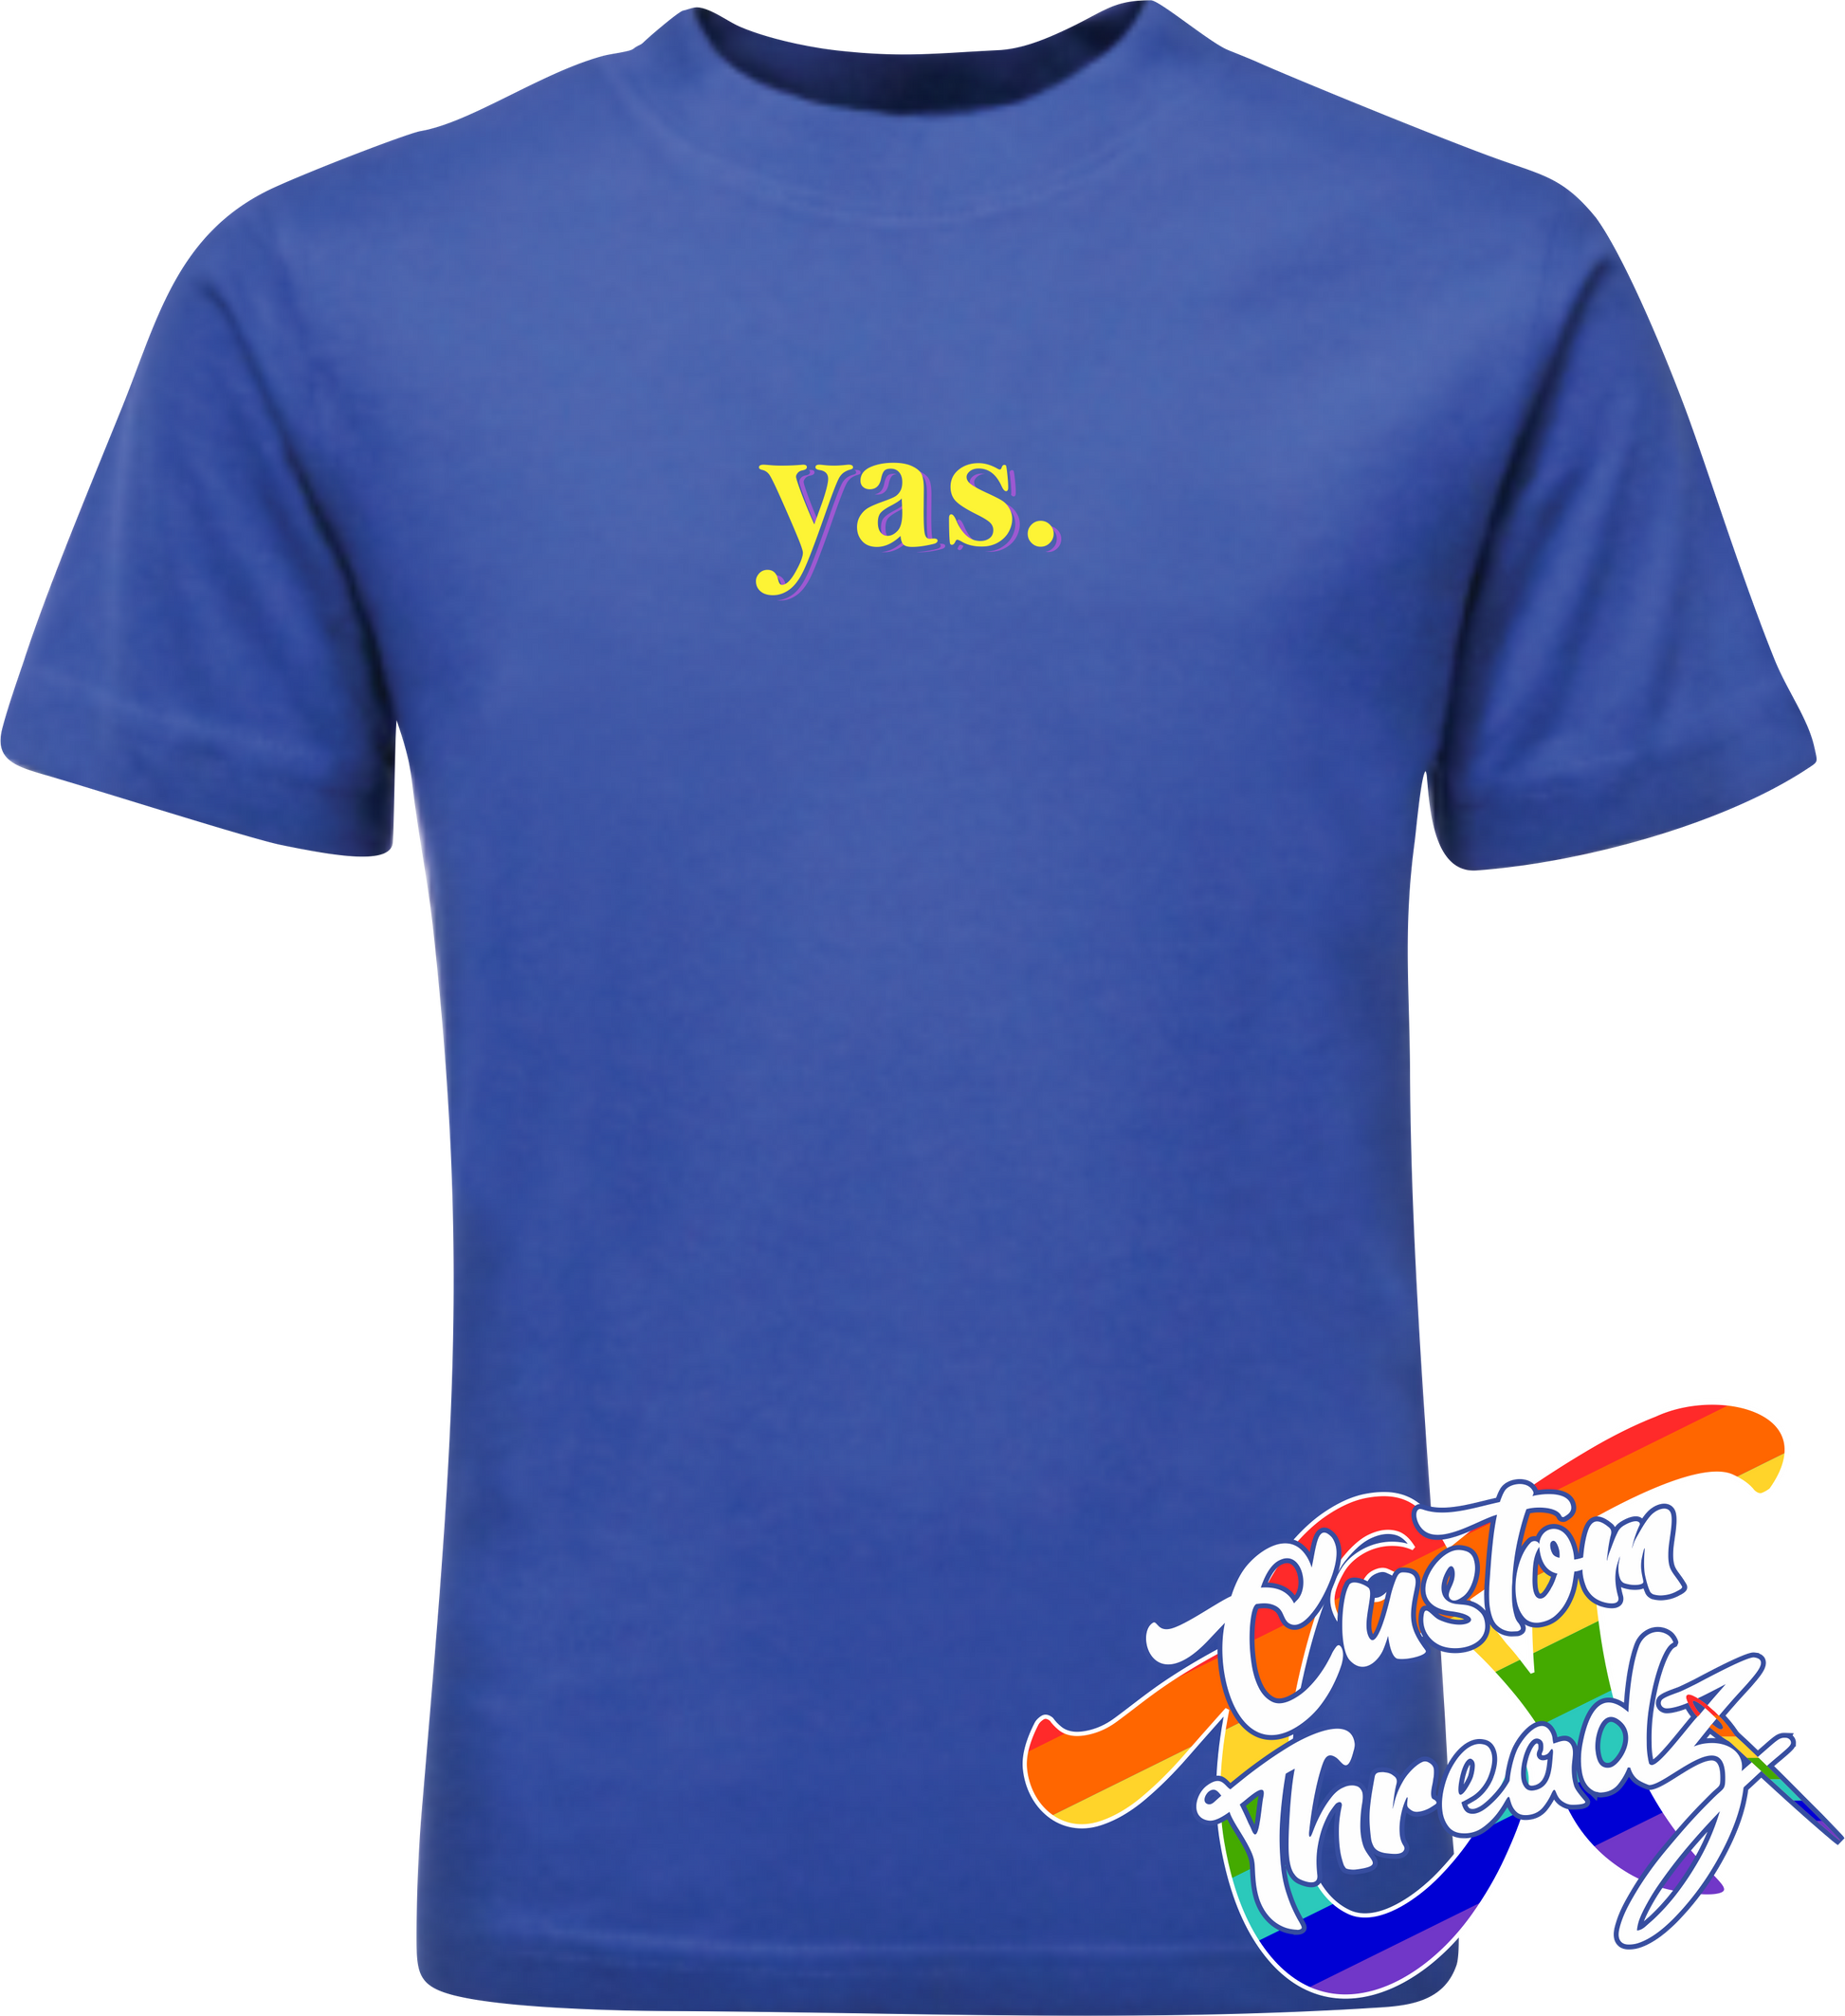 royal blue tee with yas DTG printed design